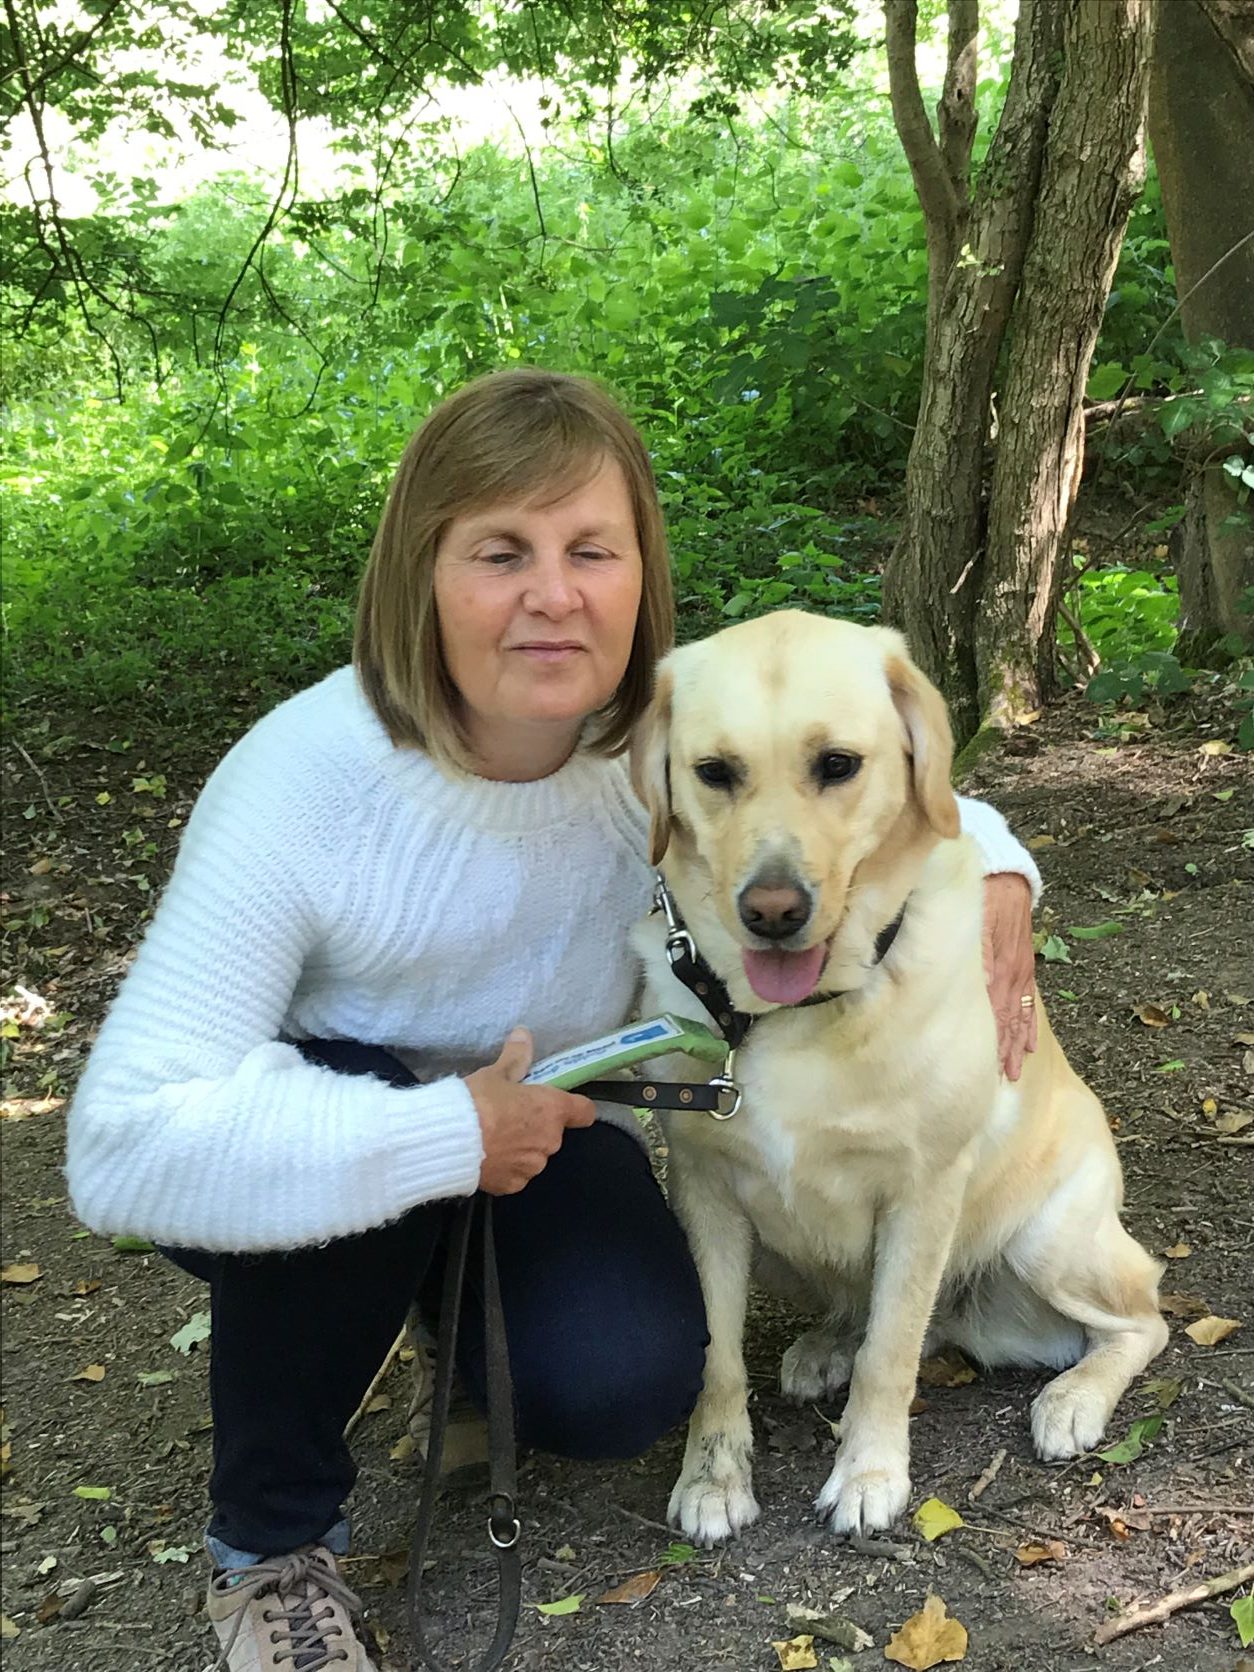 Julie Stephens, Gloucestershire SLC member, is knelt next to her guide dog, Heidi. She is on a woodland path with trees behind her.